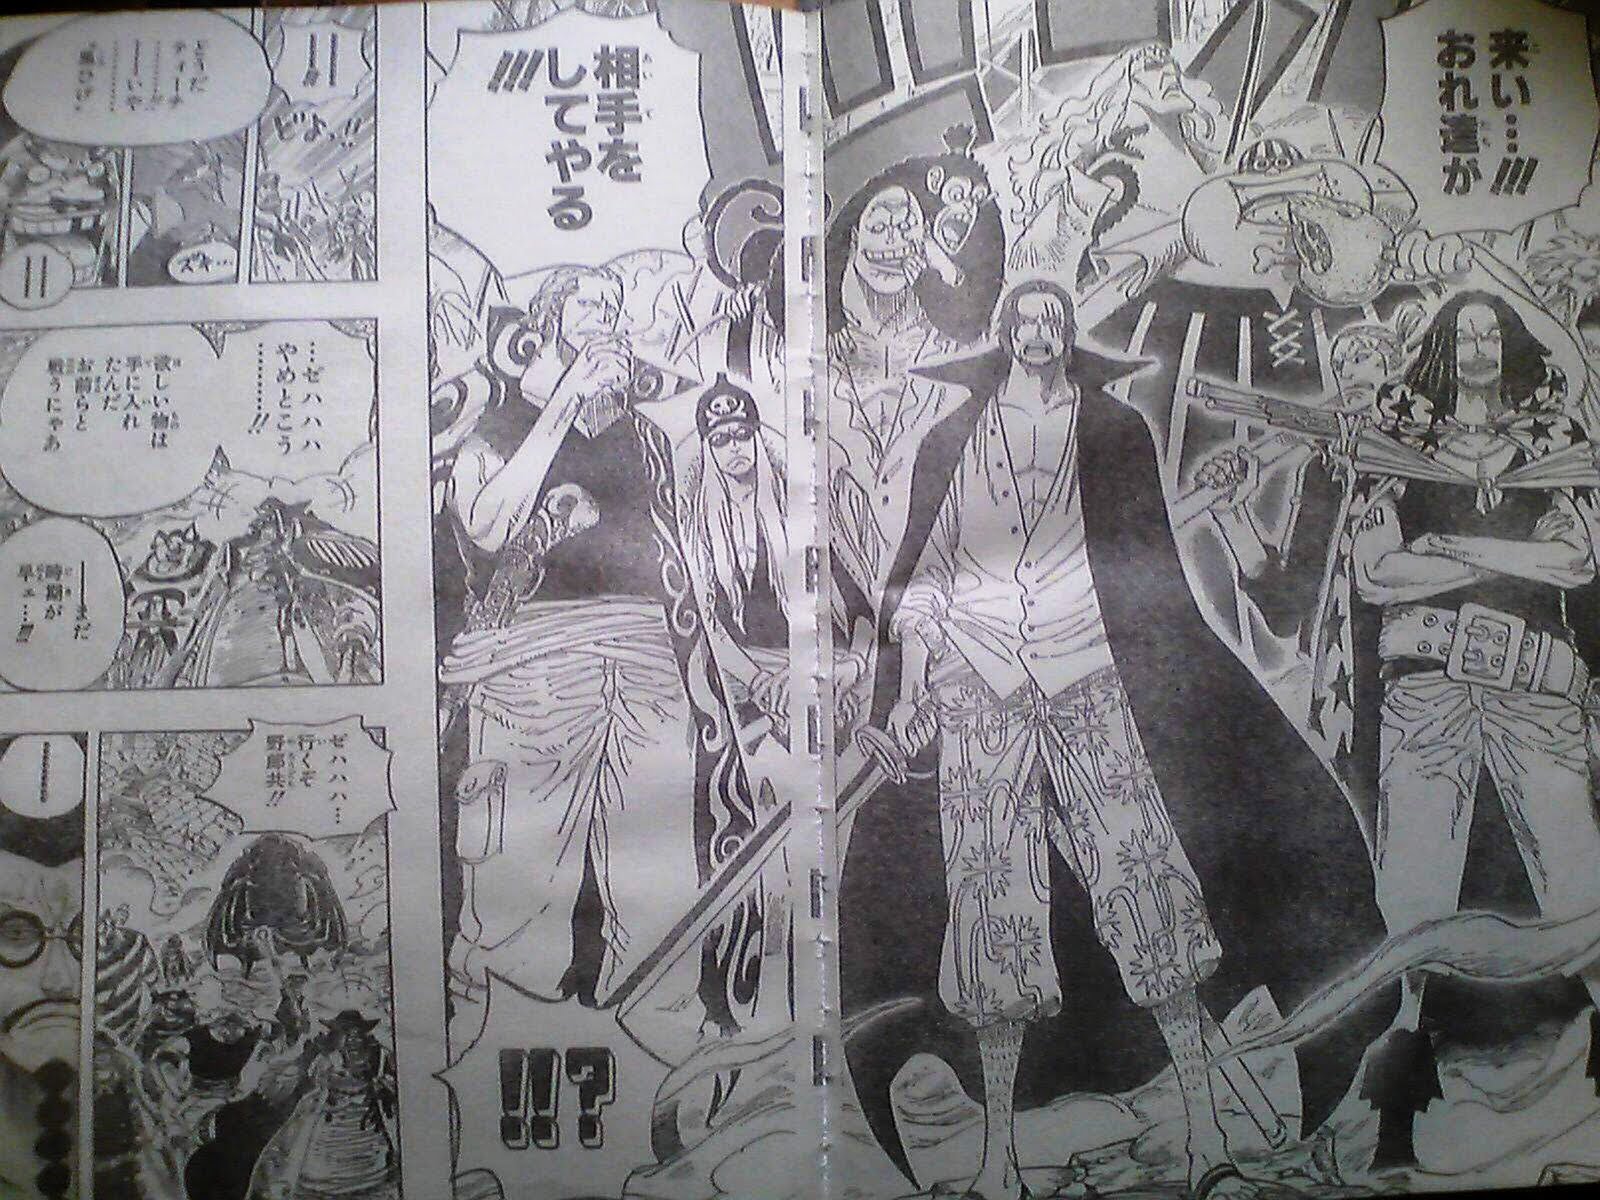 One Piece 580 spoilers and discussion 10-11+OP+580+spoiler